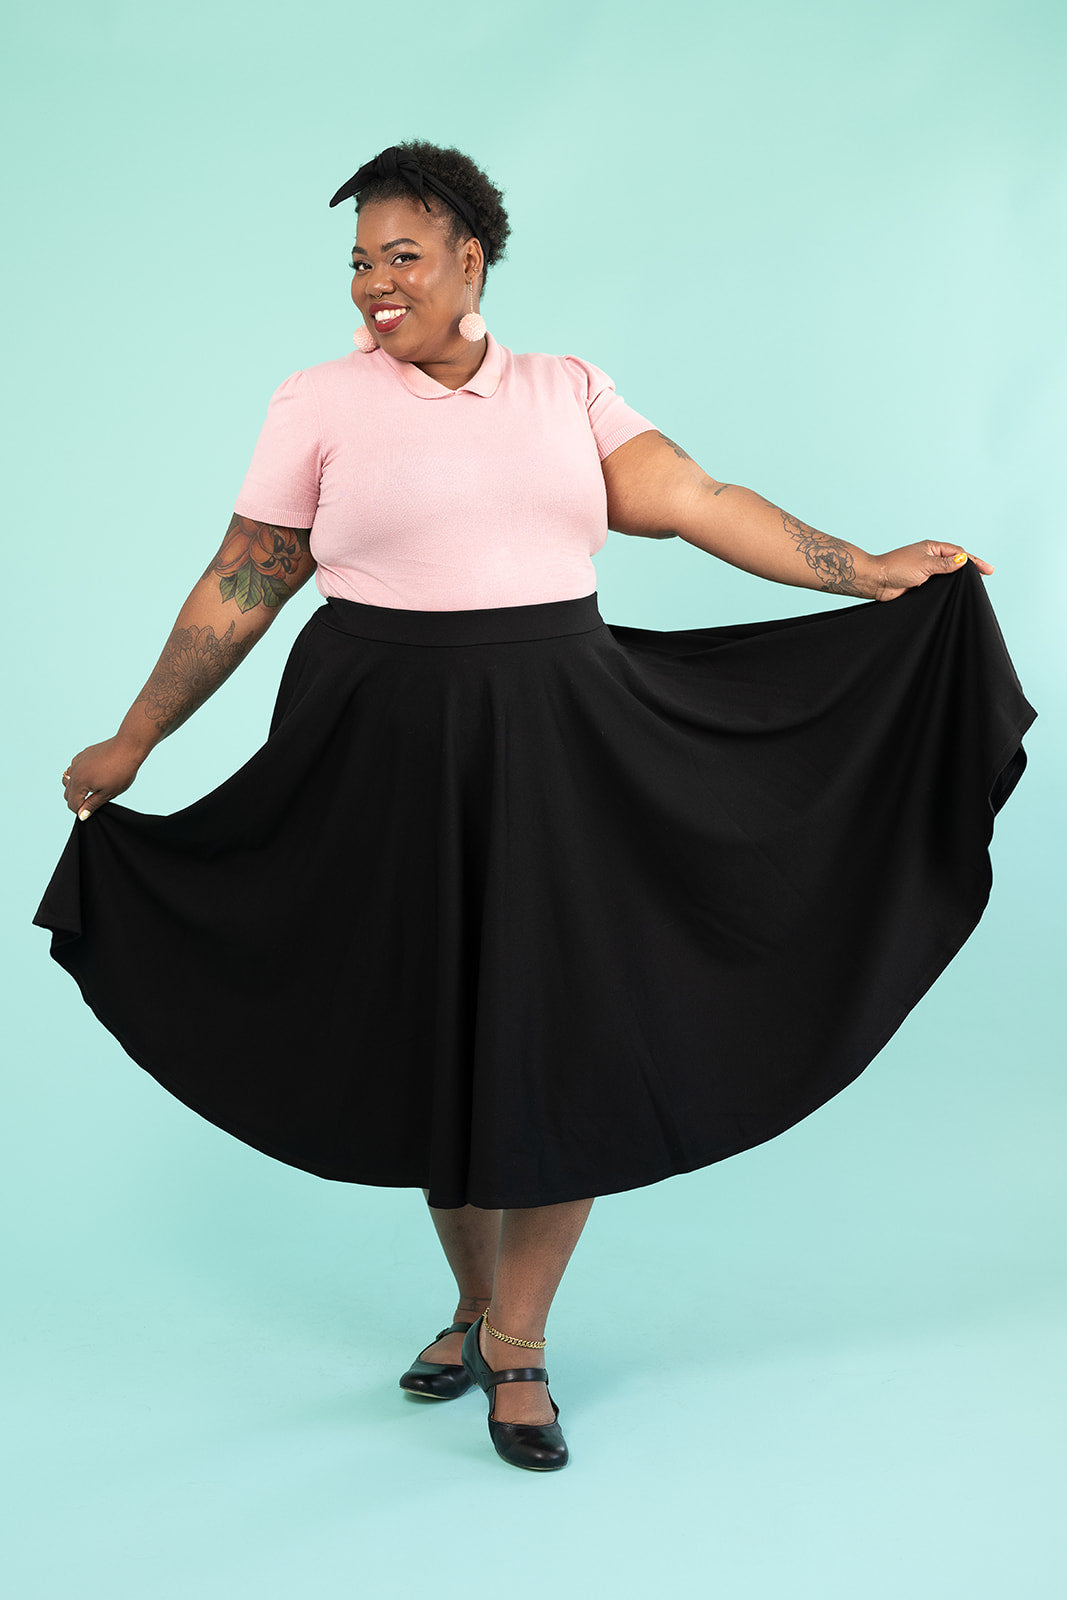 A black woman is jubilantly smiling and showing off her skirt. She is wearing a pink top and pompom earrings and a black skirt.